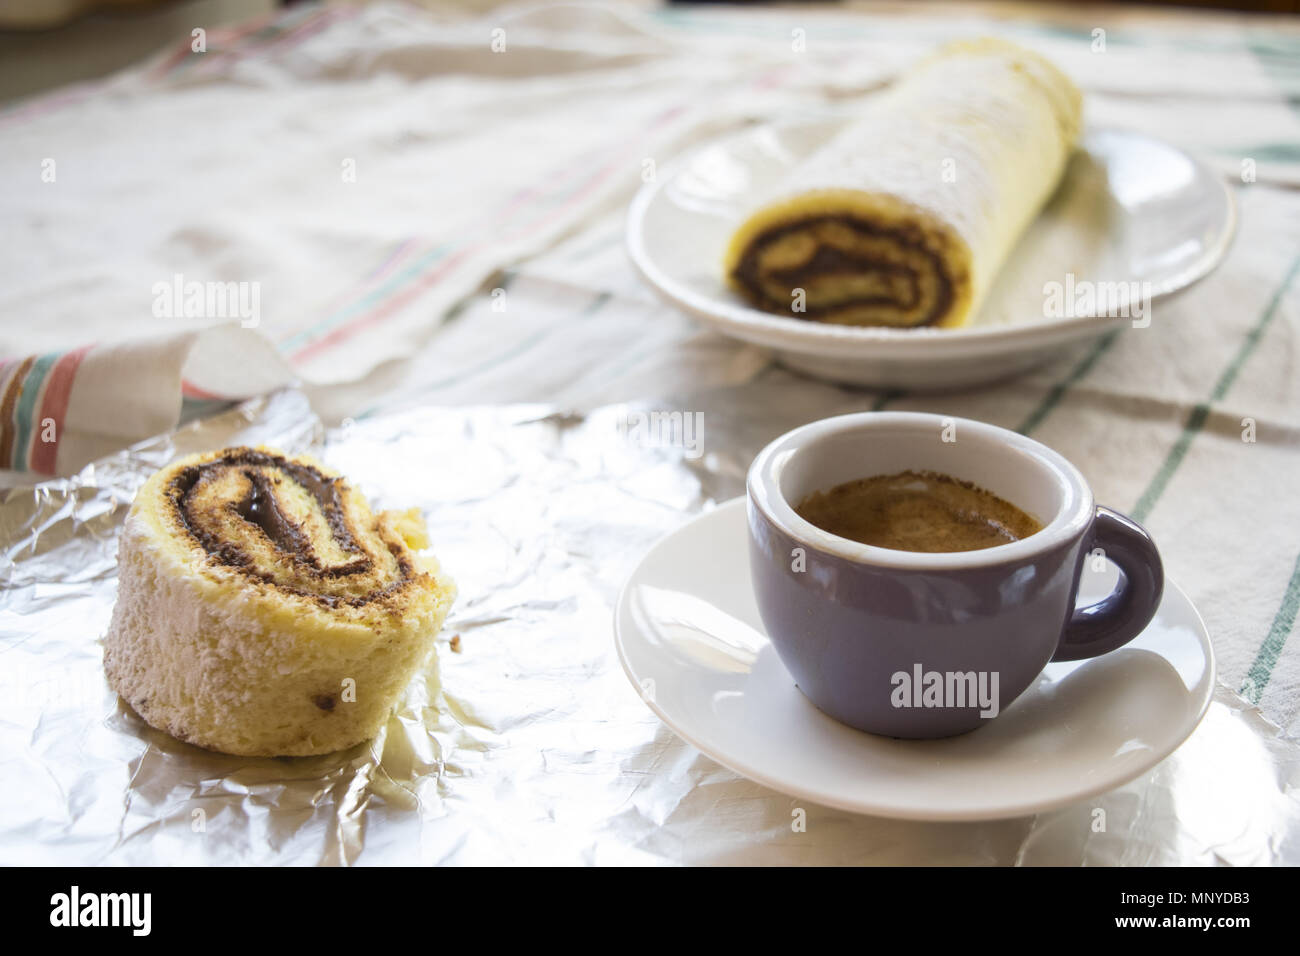 breakfast with Swiss roll with chocolate filling and espresso Stock Photo